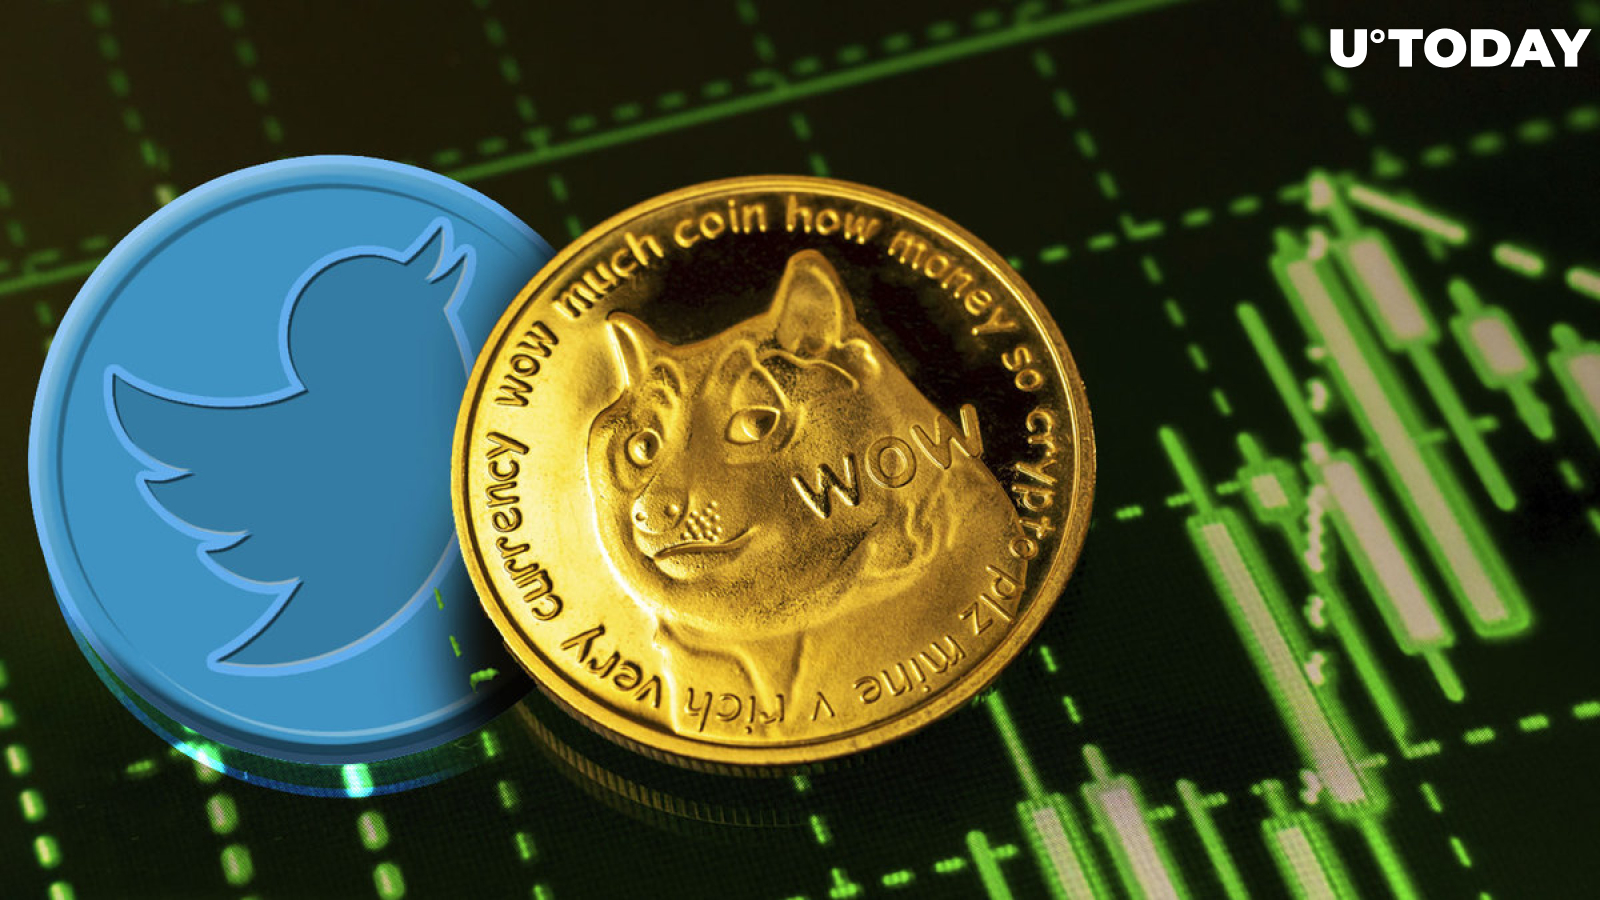 Dogecoin (DOGE) Price Slumps Amid Twitter Publicity, Here's Why Hype Faded Fast